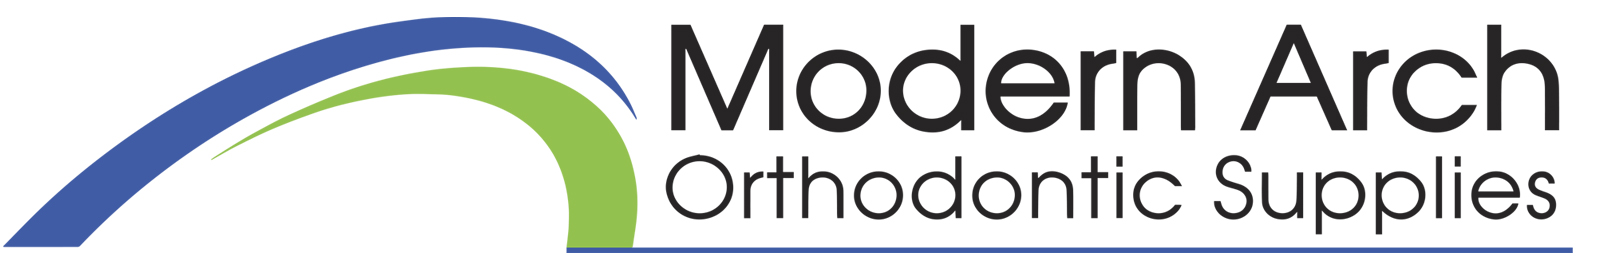 Orthodontic Supplies - Modern Arches Logo